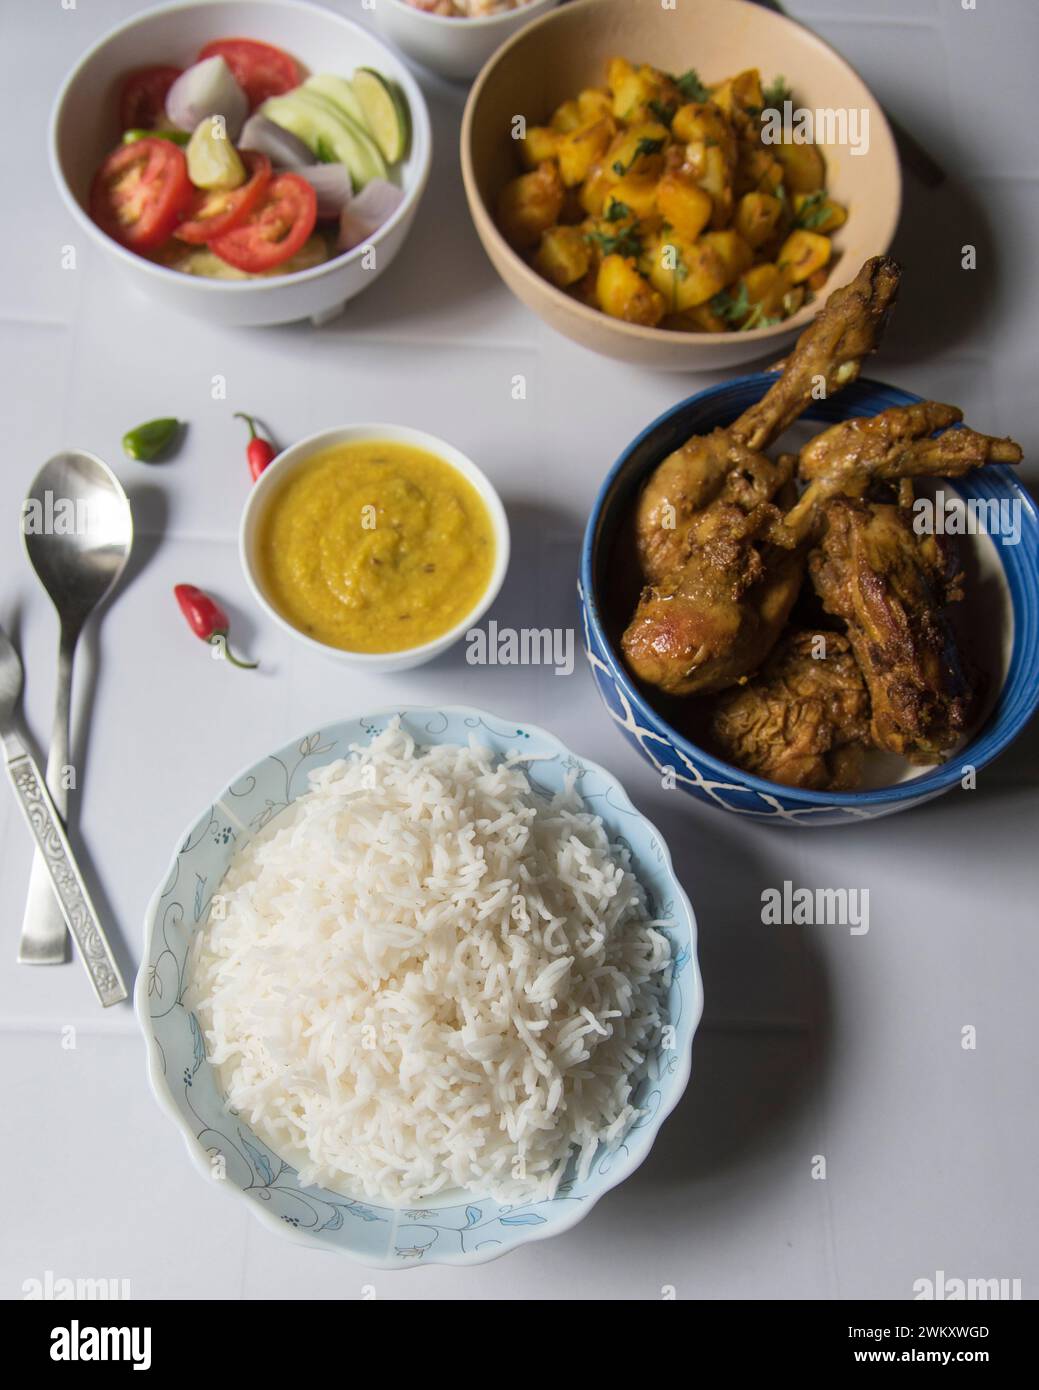 Ready to eat Indian non veg lunch menu served. Top view, Stock Photo